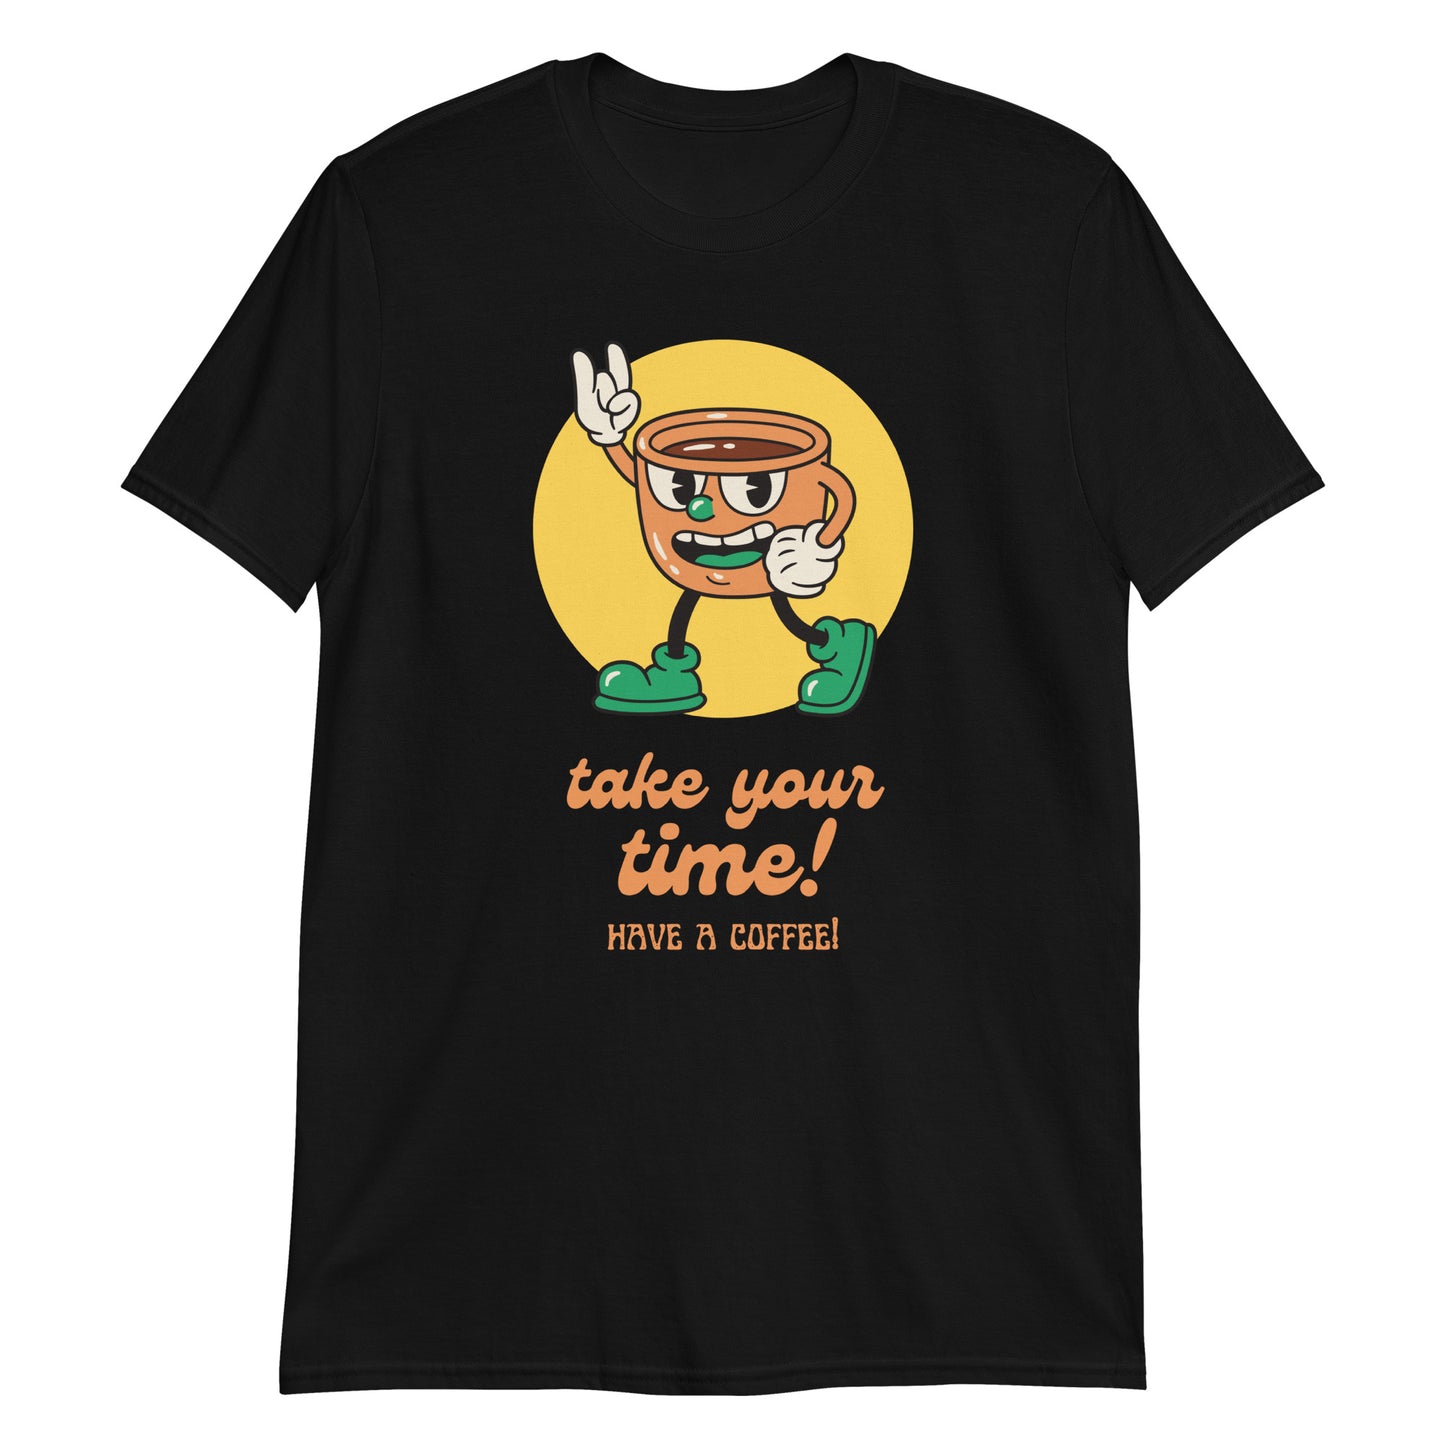 Take Your Time, Have A Coffee - Short-Sleeve Unisex T-Shirt Black Unisex T-shirt Coffee Retro